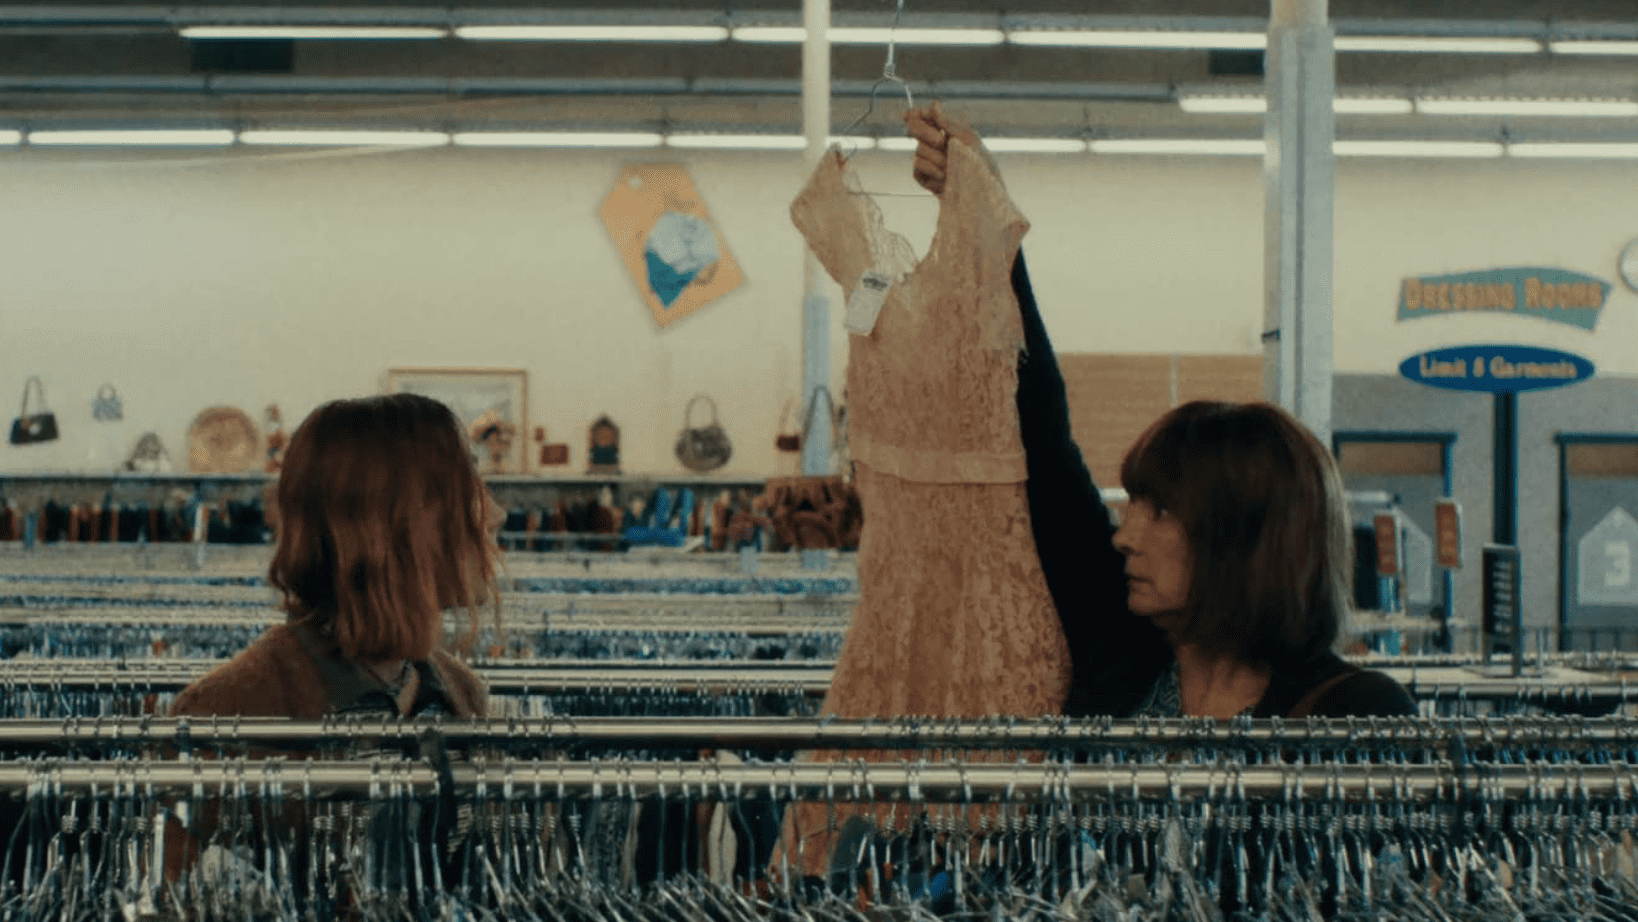 A mother holds up a thrifted dress for her daughter’s consideration in this image from Hulu